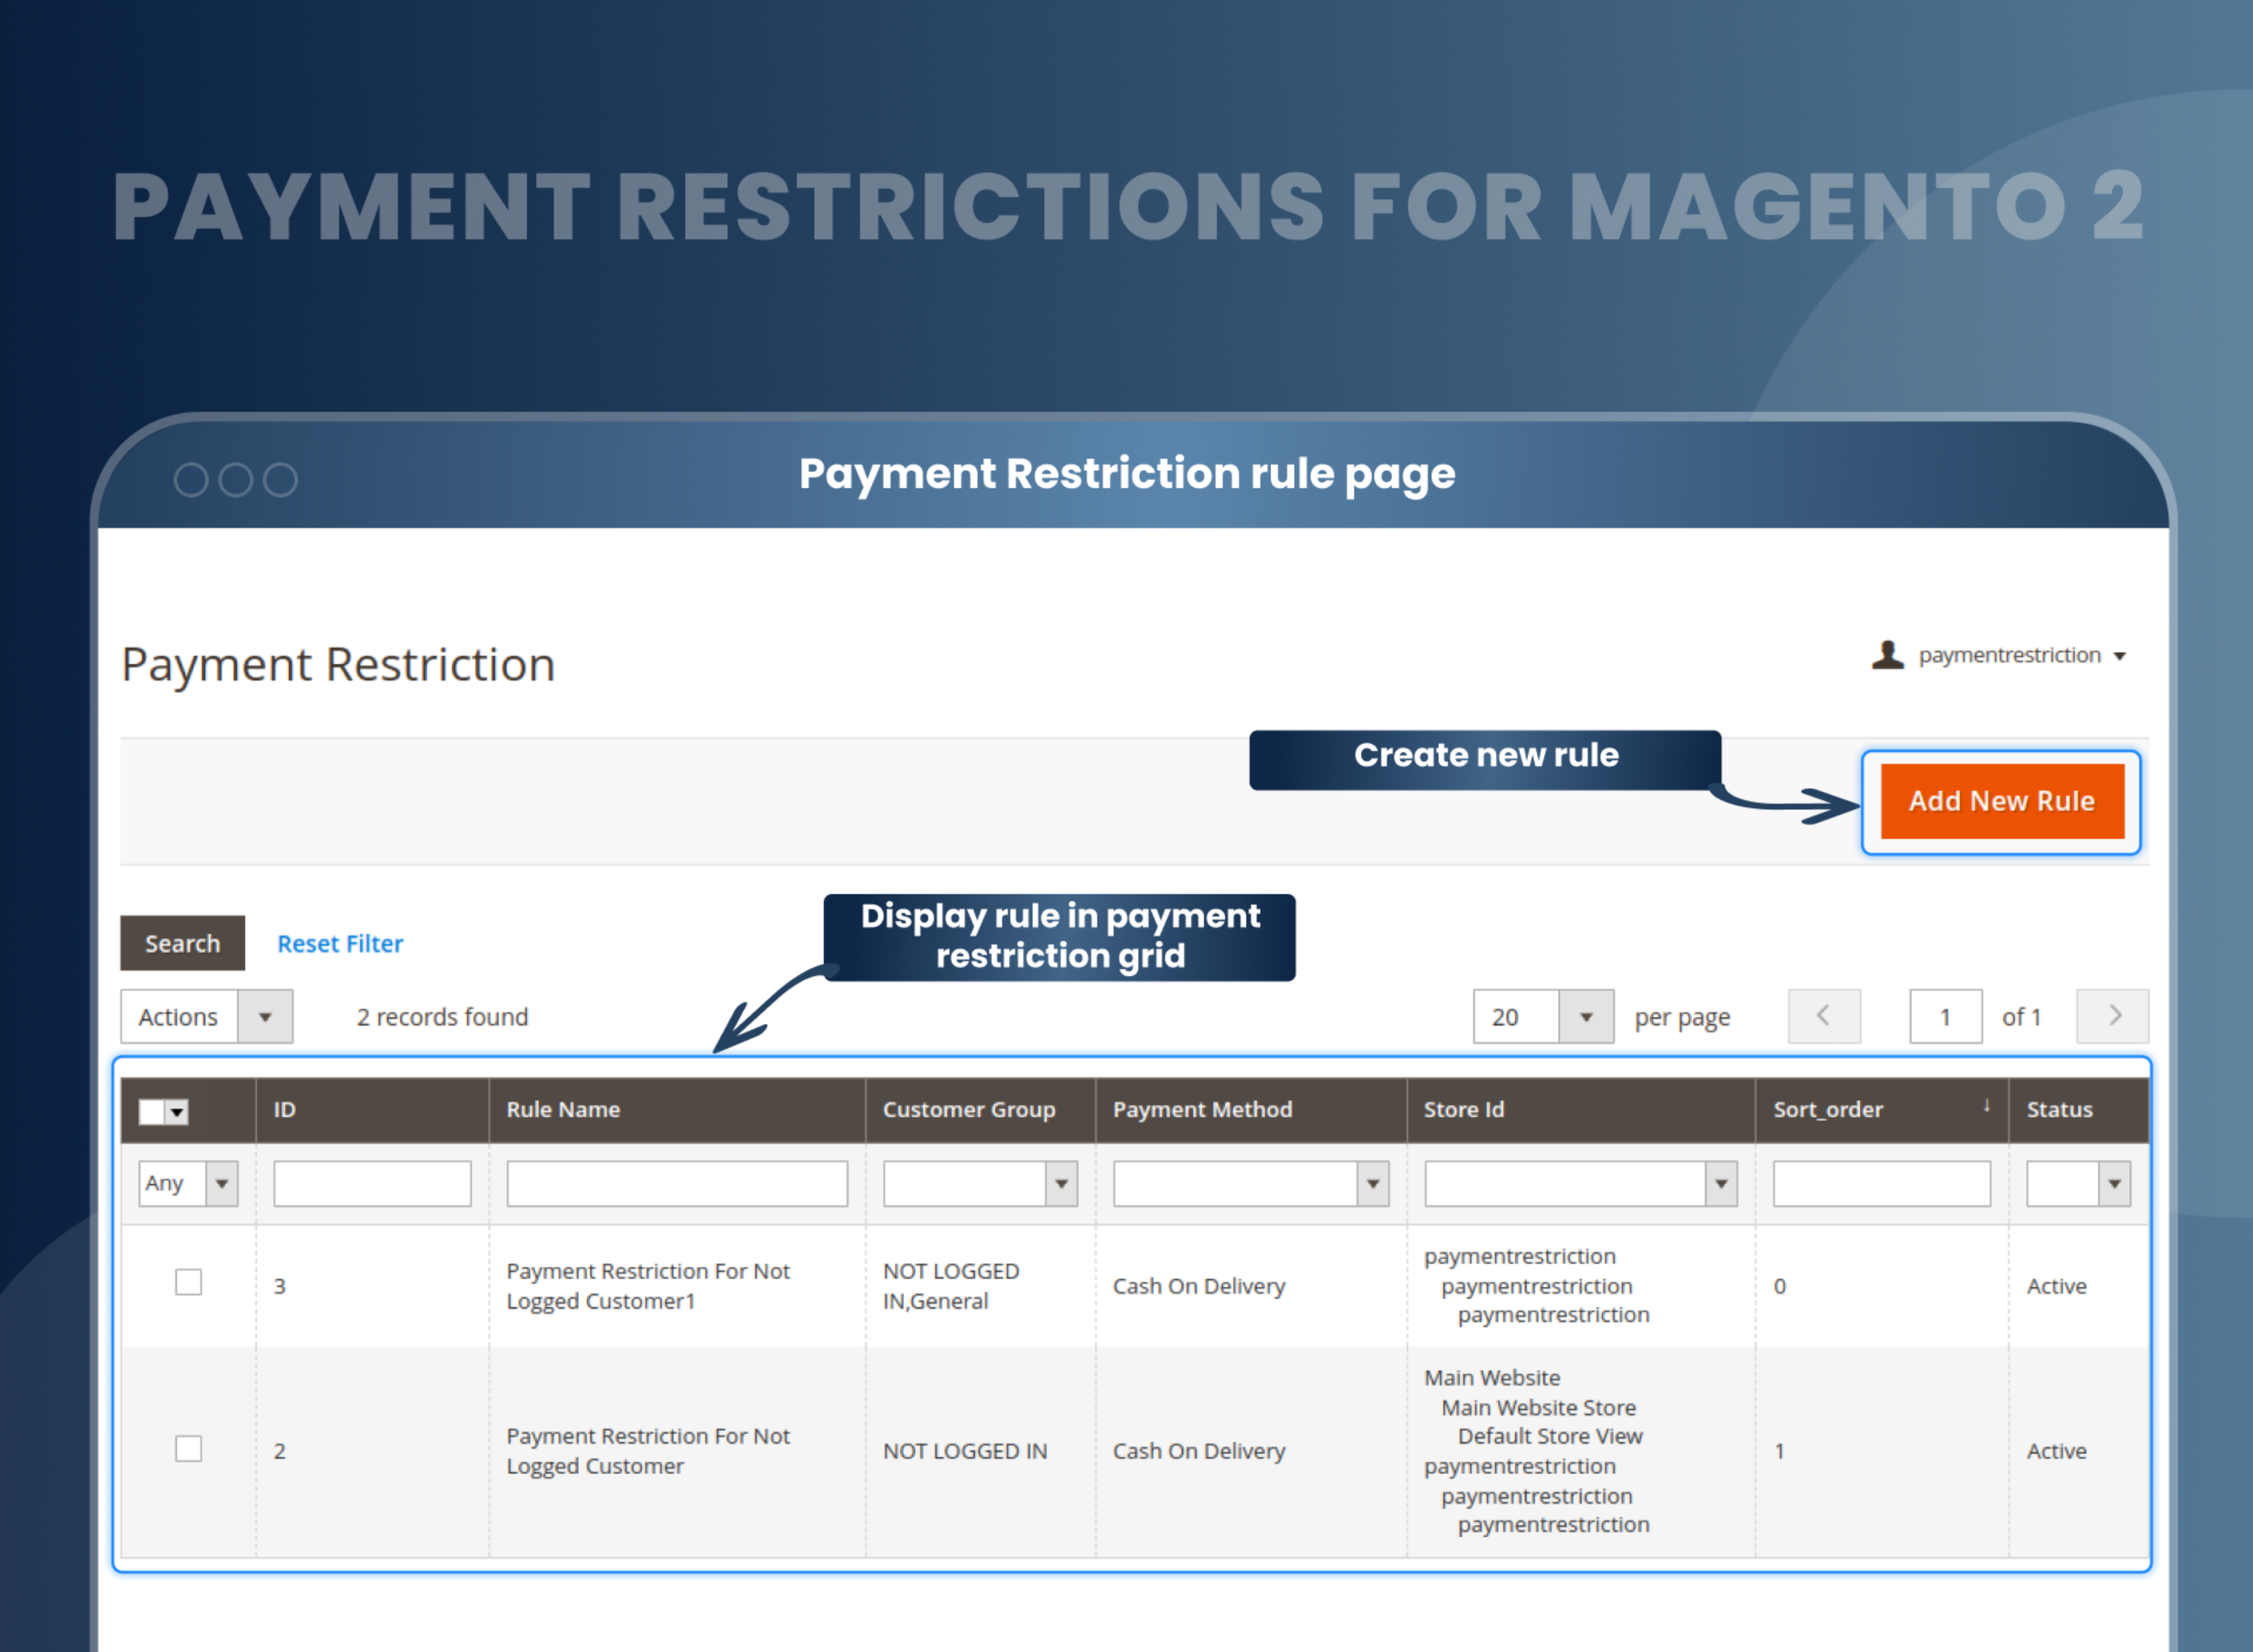 Payment Restriction rule page